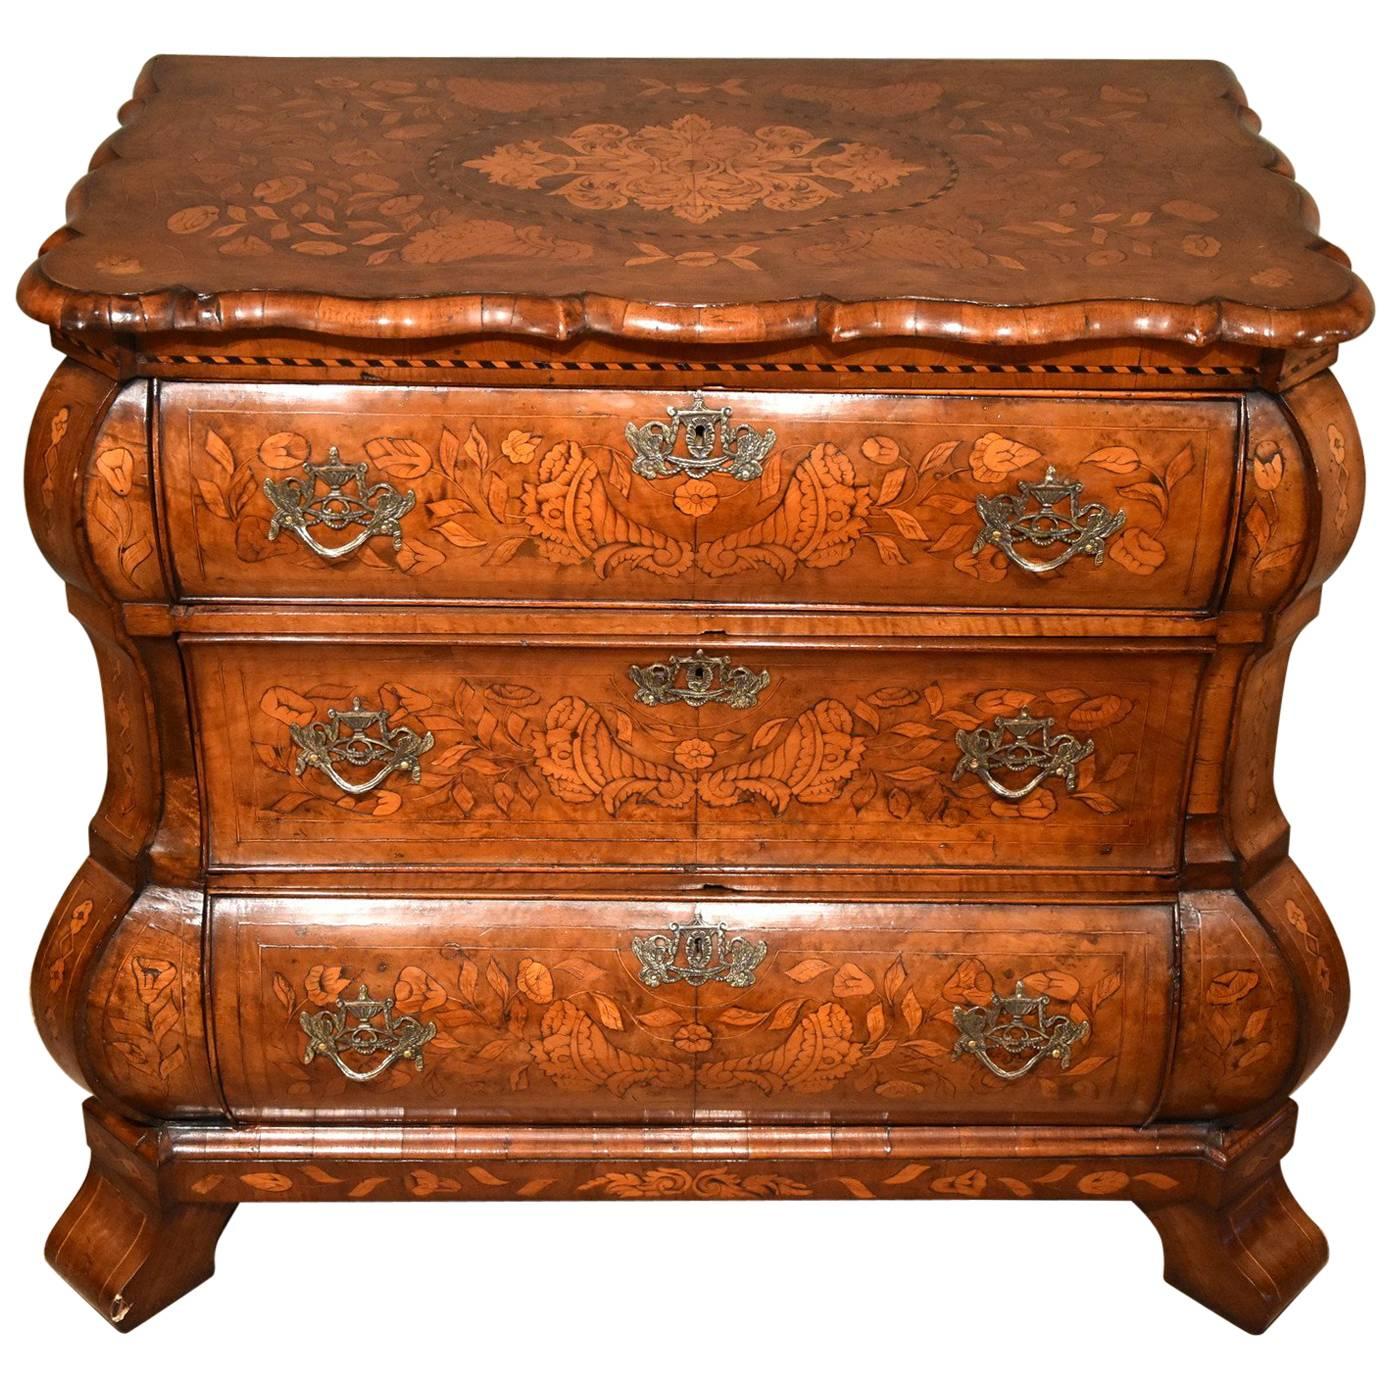 Wonderful Floral Marquetry Dutch Bombe Fronted Chest of Drawers